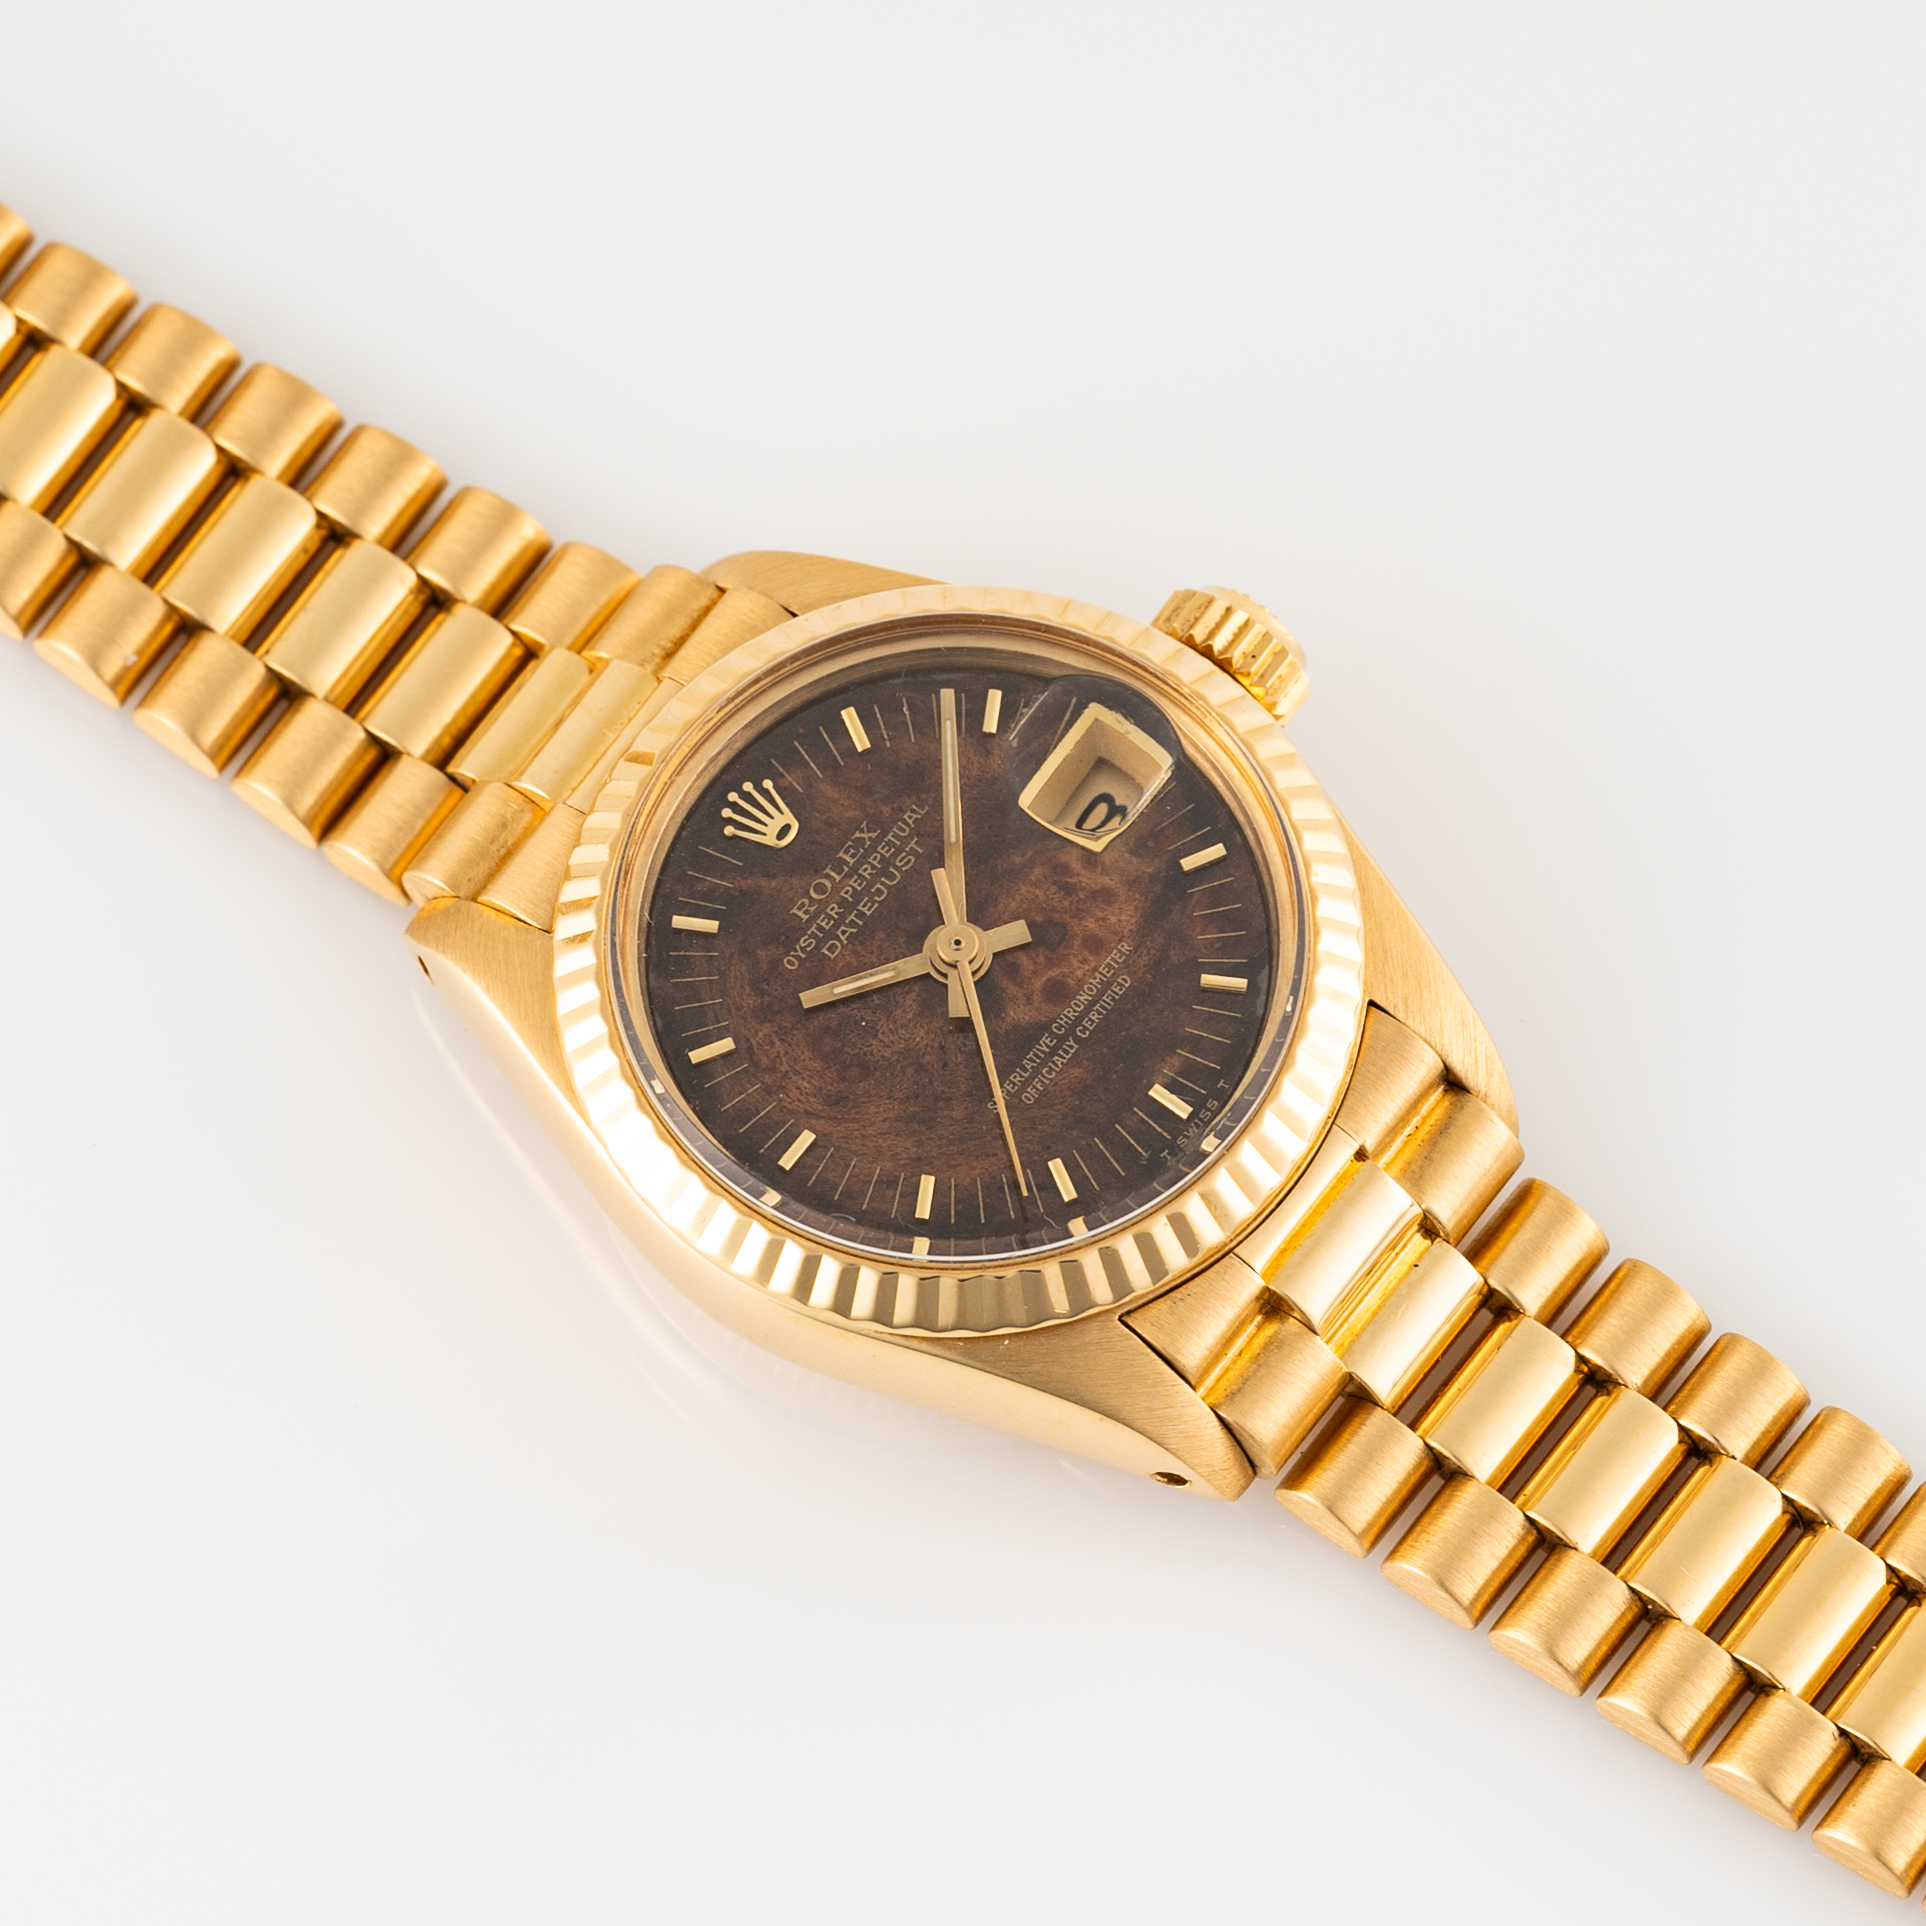 A LADY'S 18K SOLID GOLD ROLEX OYSTER PERPETUAL DATEJUST BRACELET WATCH CIRCA 1979, REF. 6917/8 - Image 3 of 9